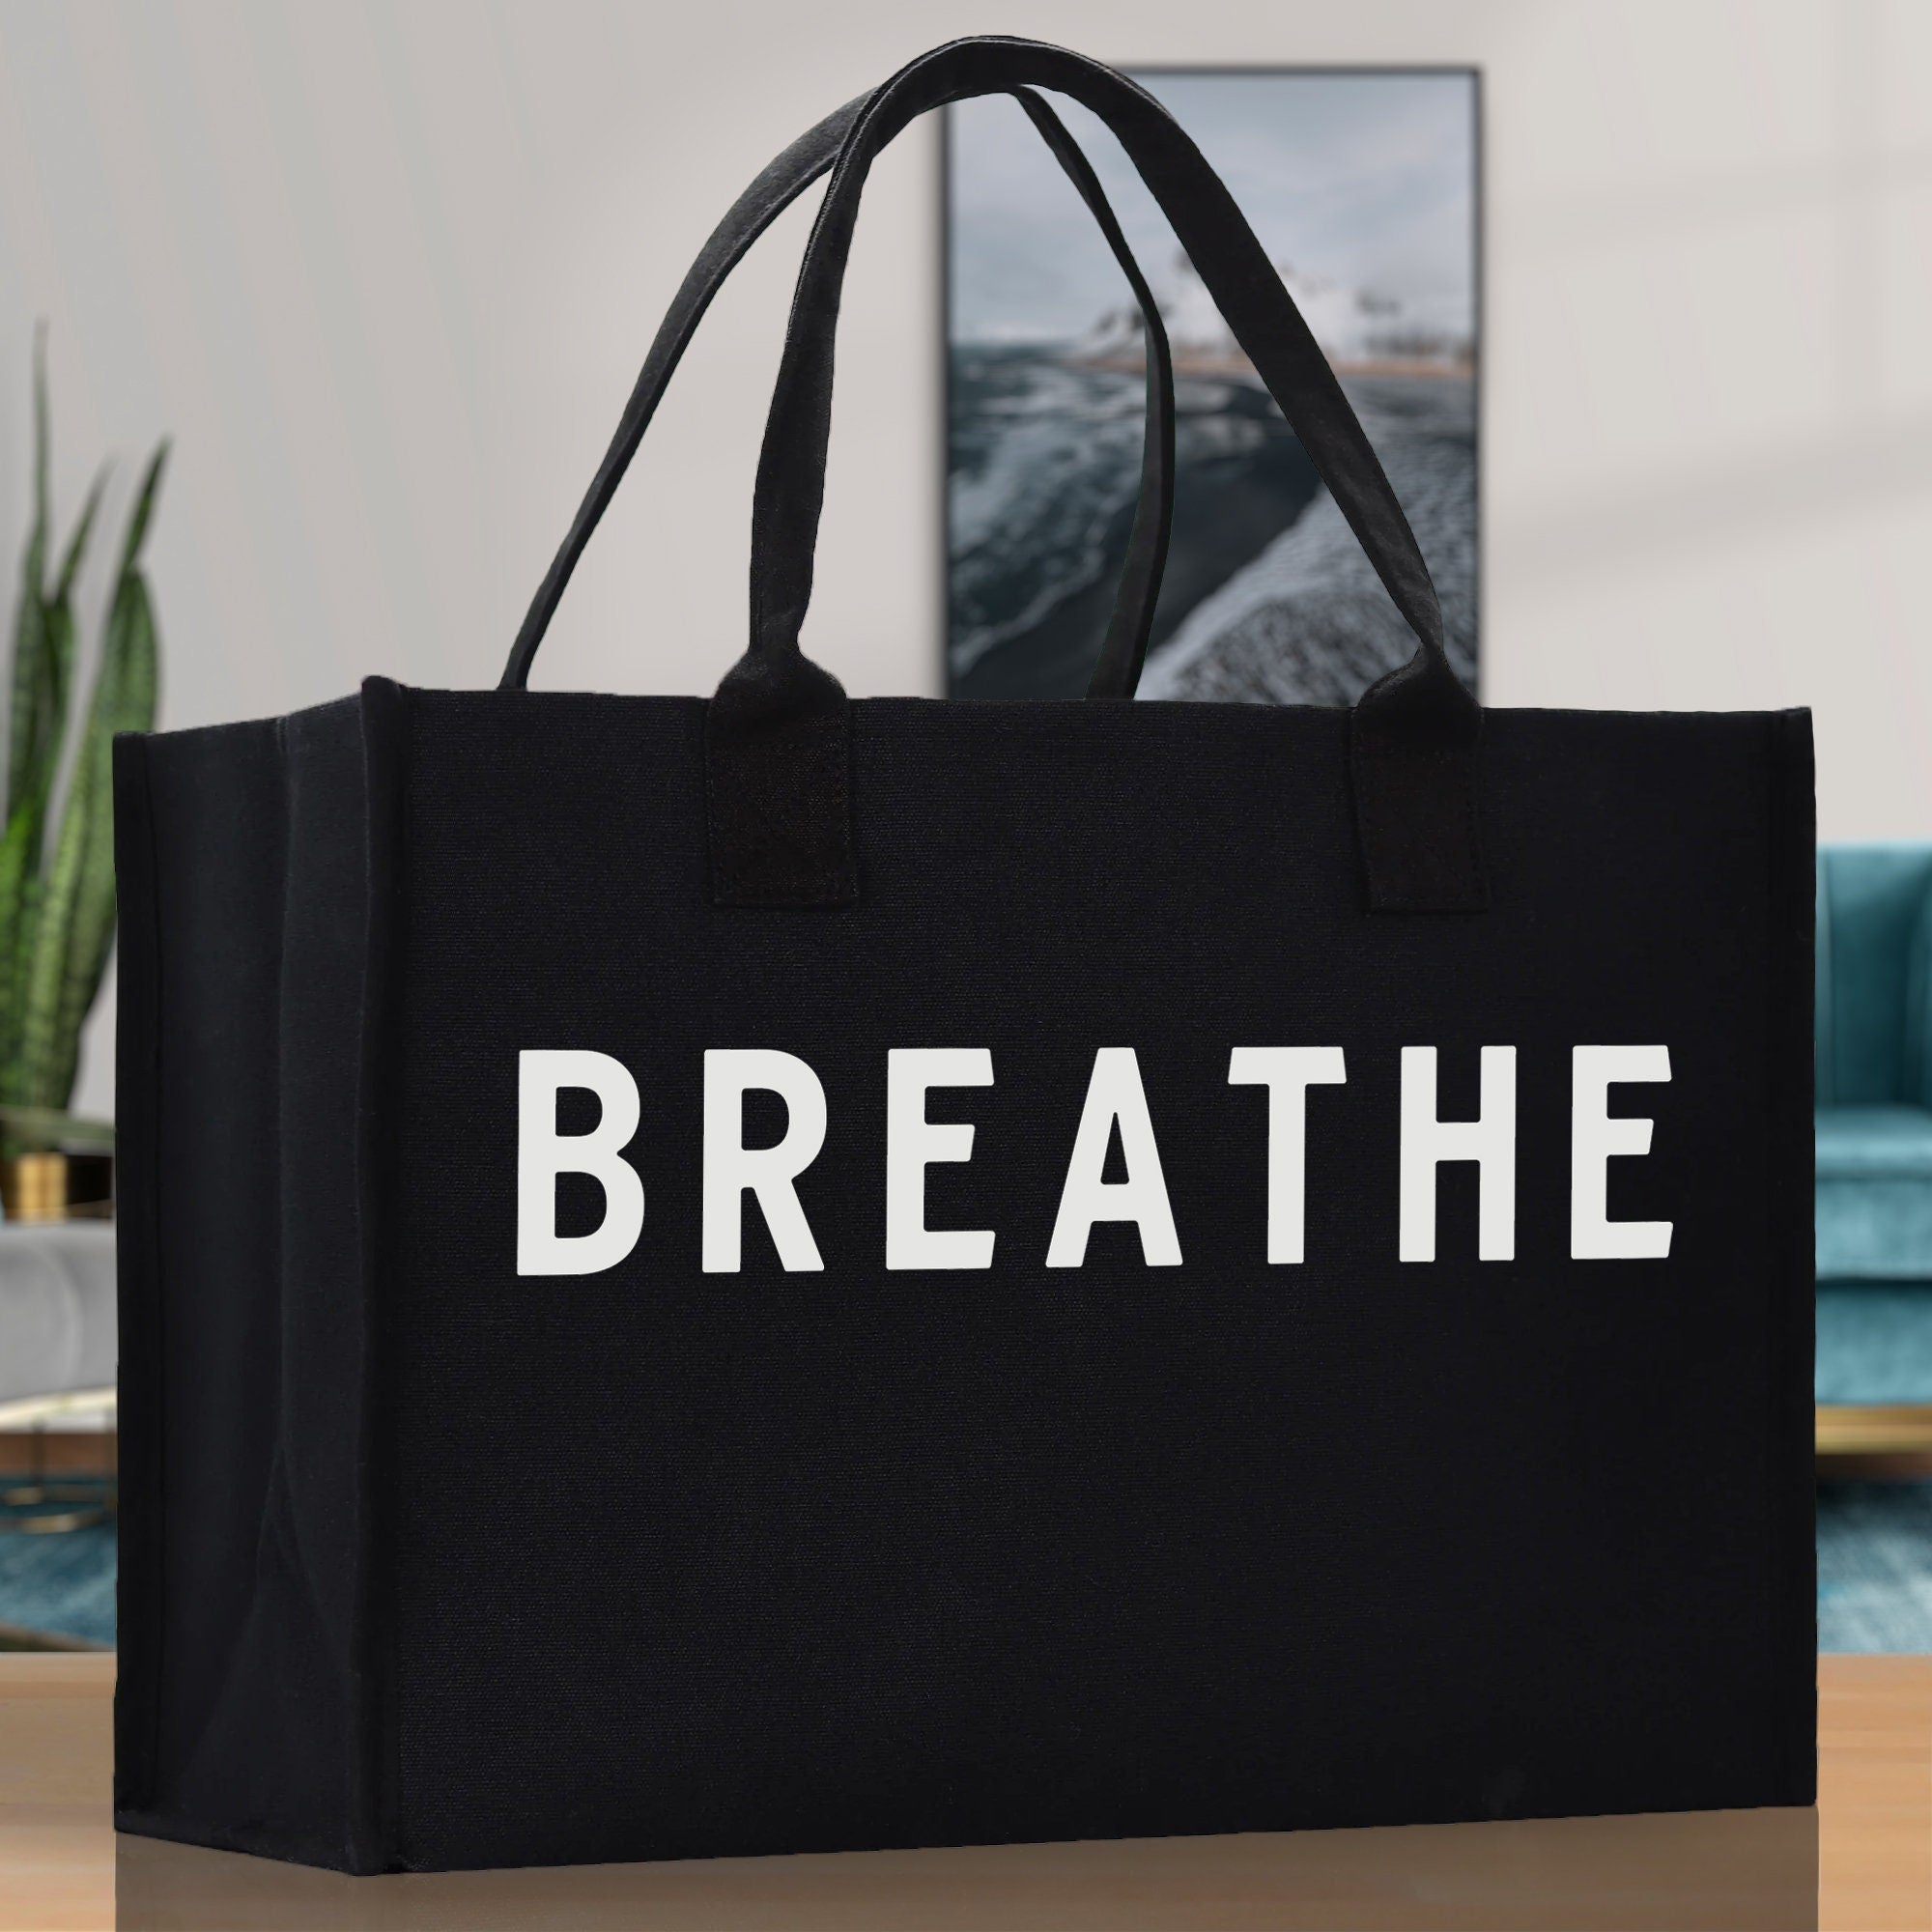 Breathe Cotton Canvas Chic Beach Tote Bag Multipurpose Tote Weekender Tote Gift for Her Outdoor Tote Vacation Tote Large Beach Bag